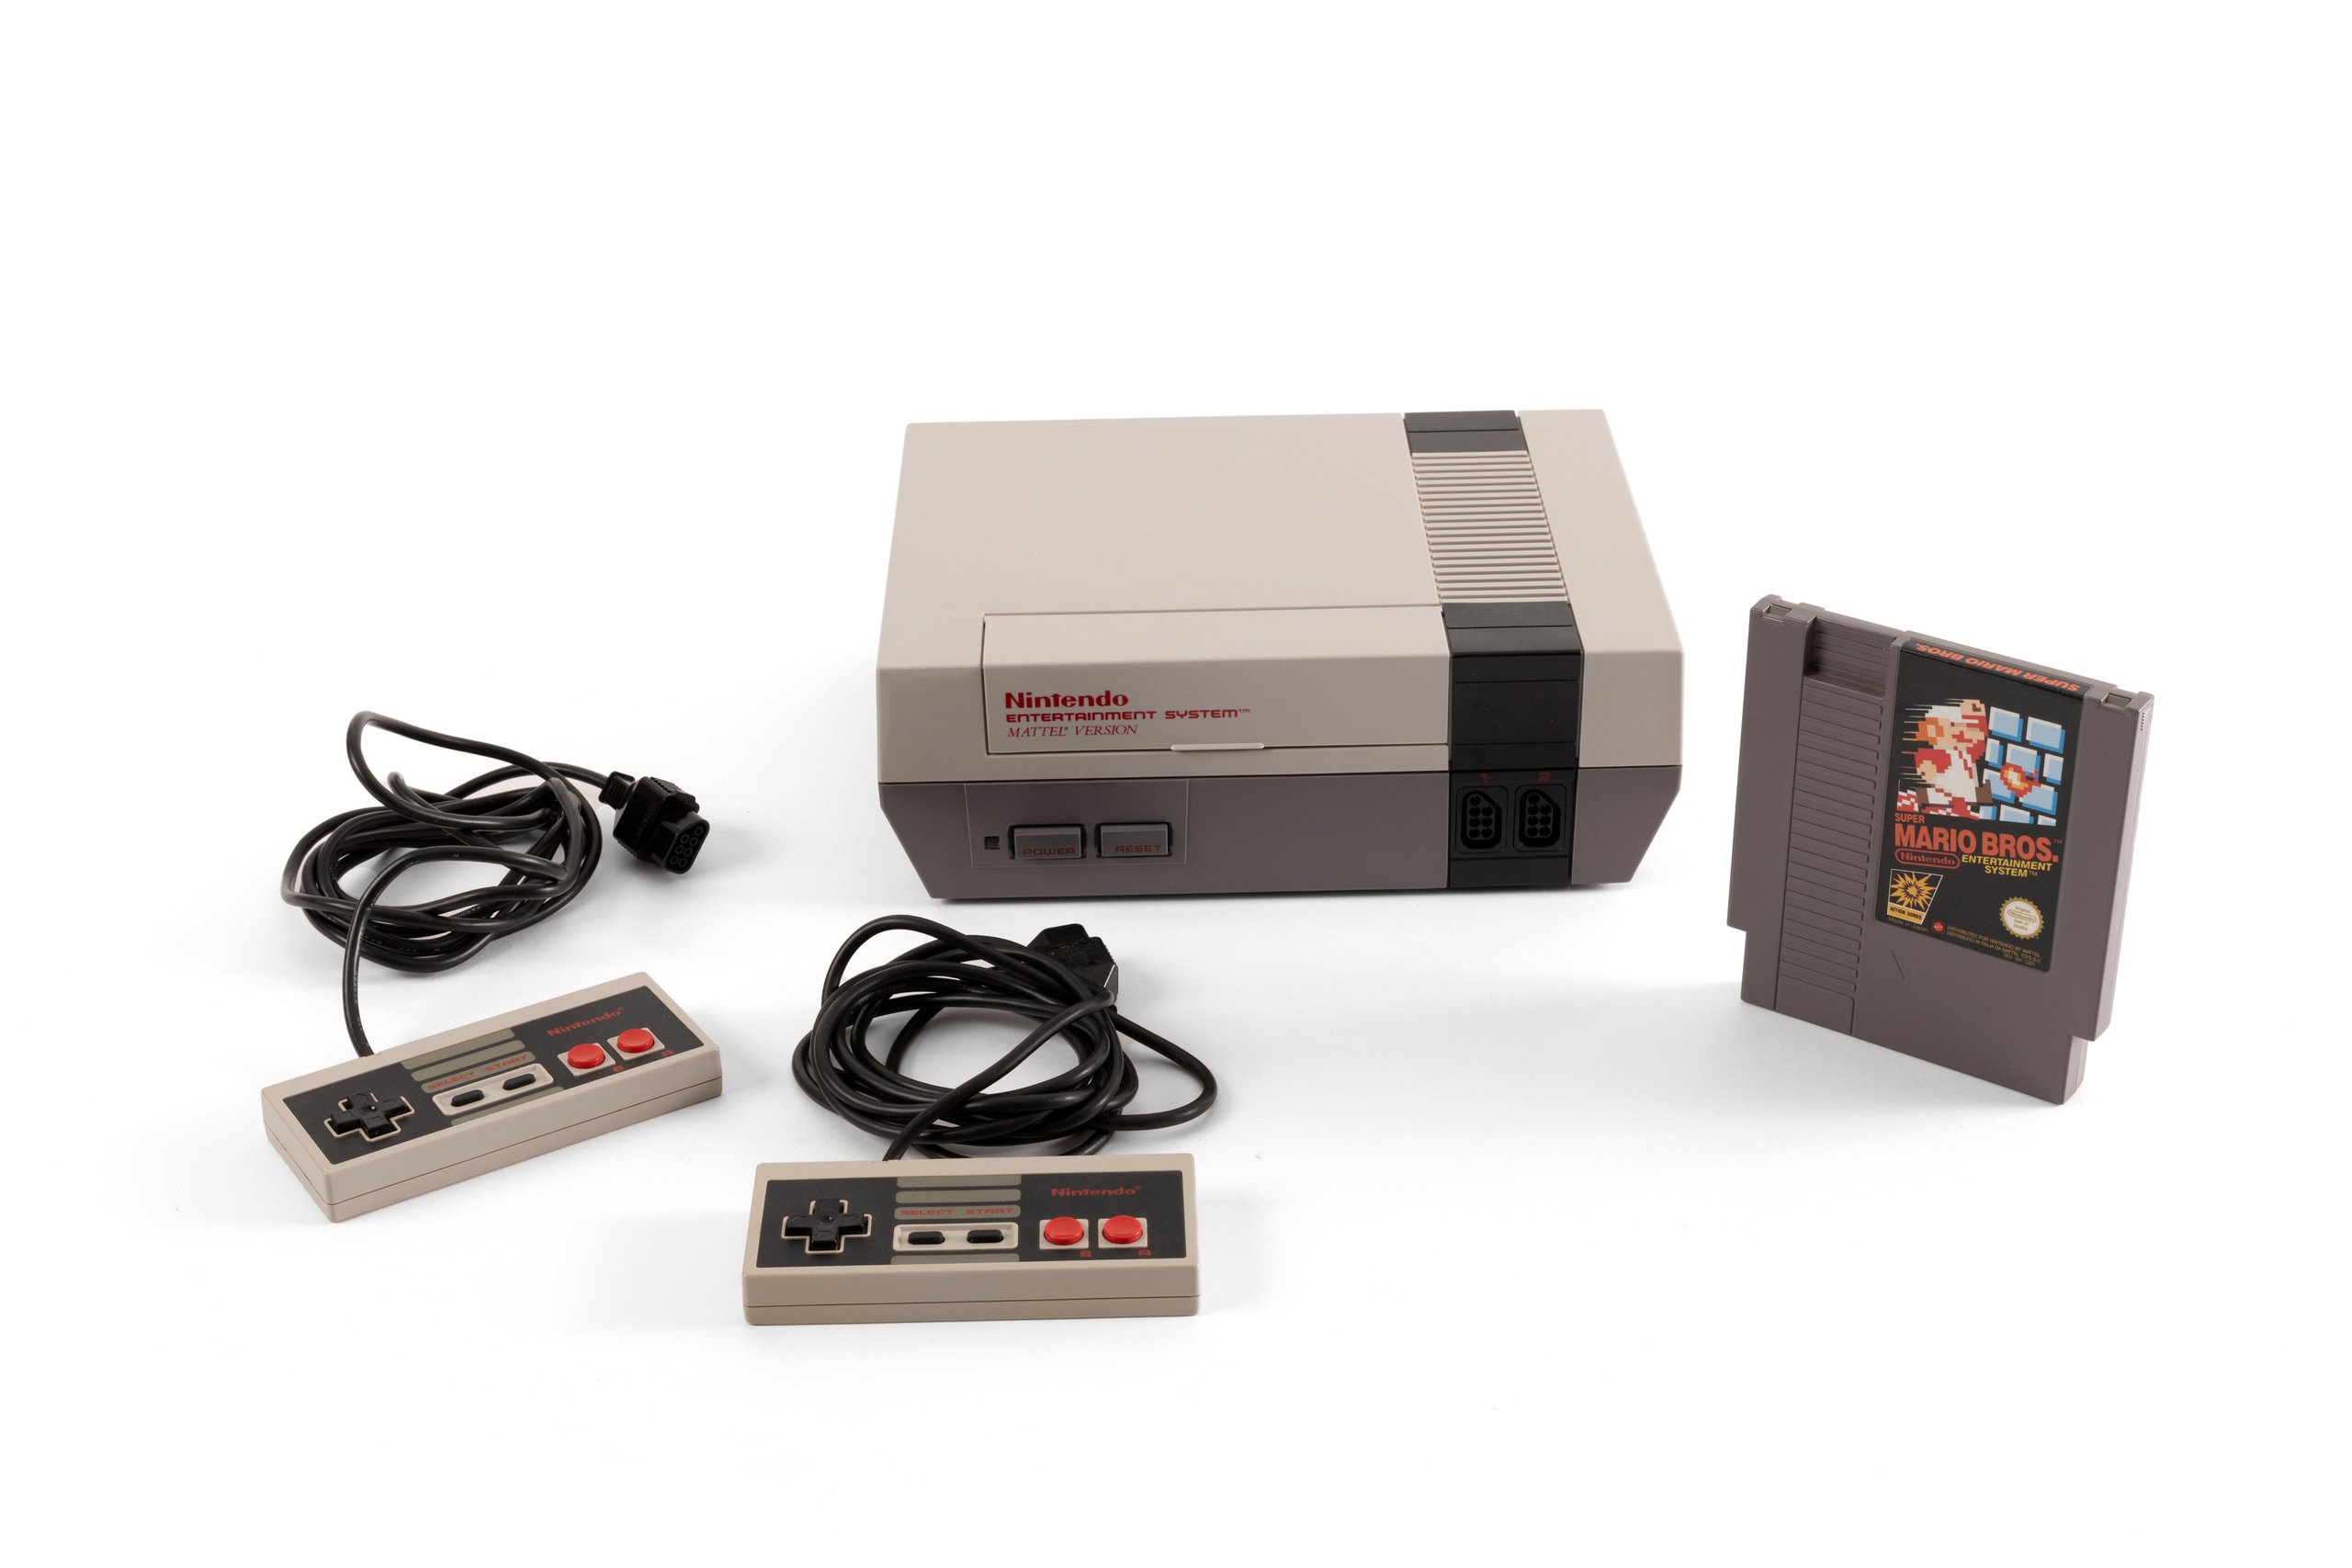 'NES' video game console with accessories and packaging by Nintendo Co Ltd